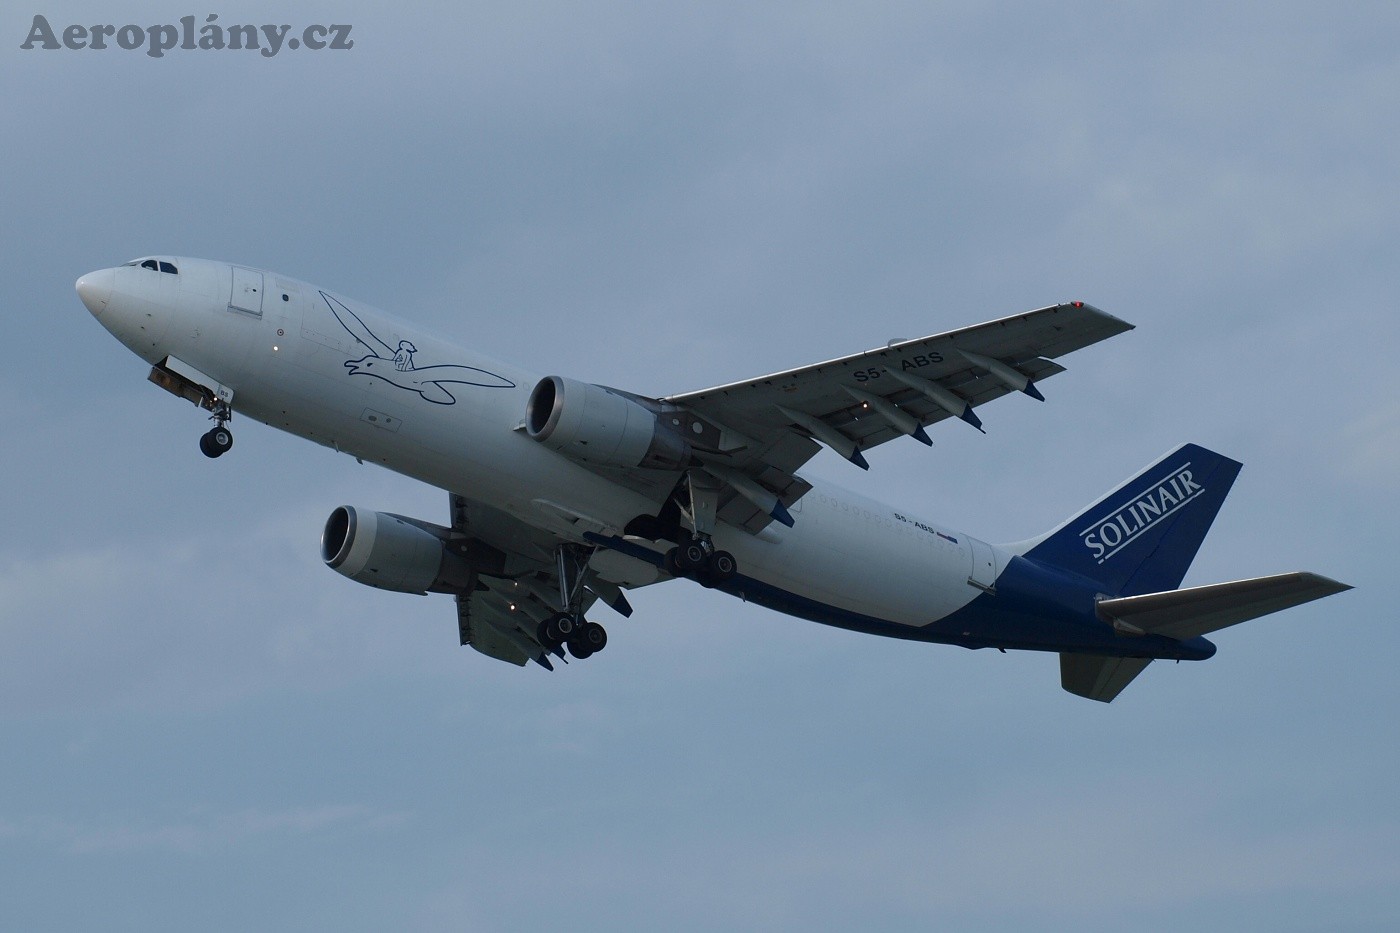 Airbus A300B4-203F - S5-ABS